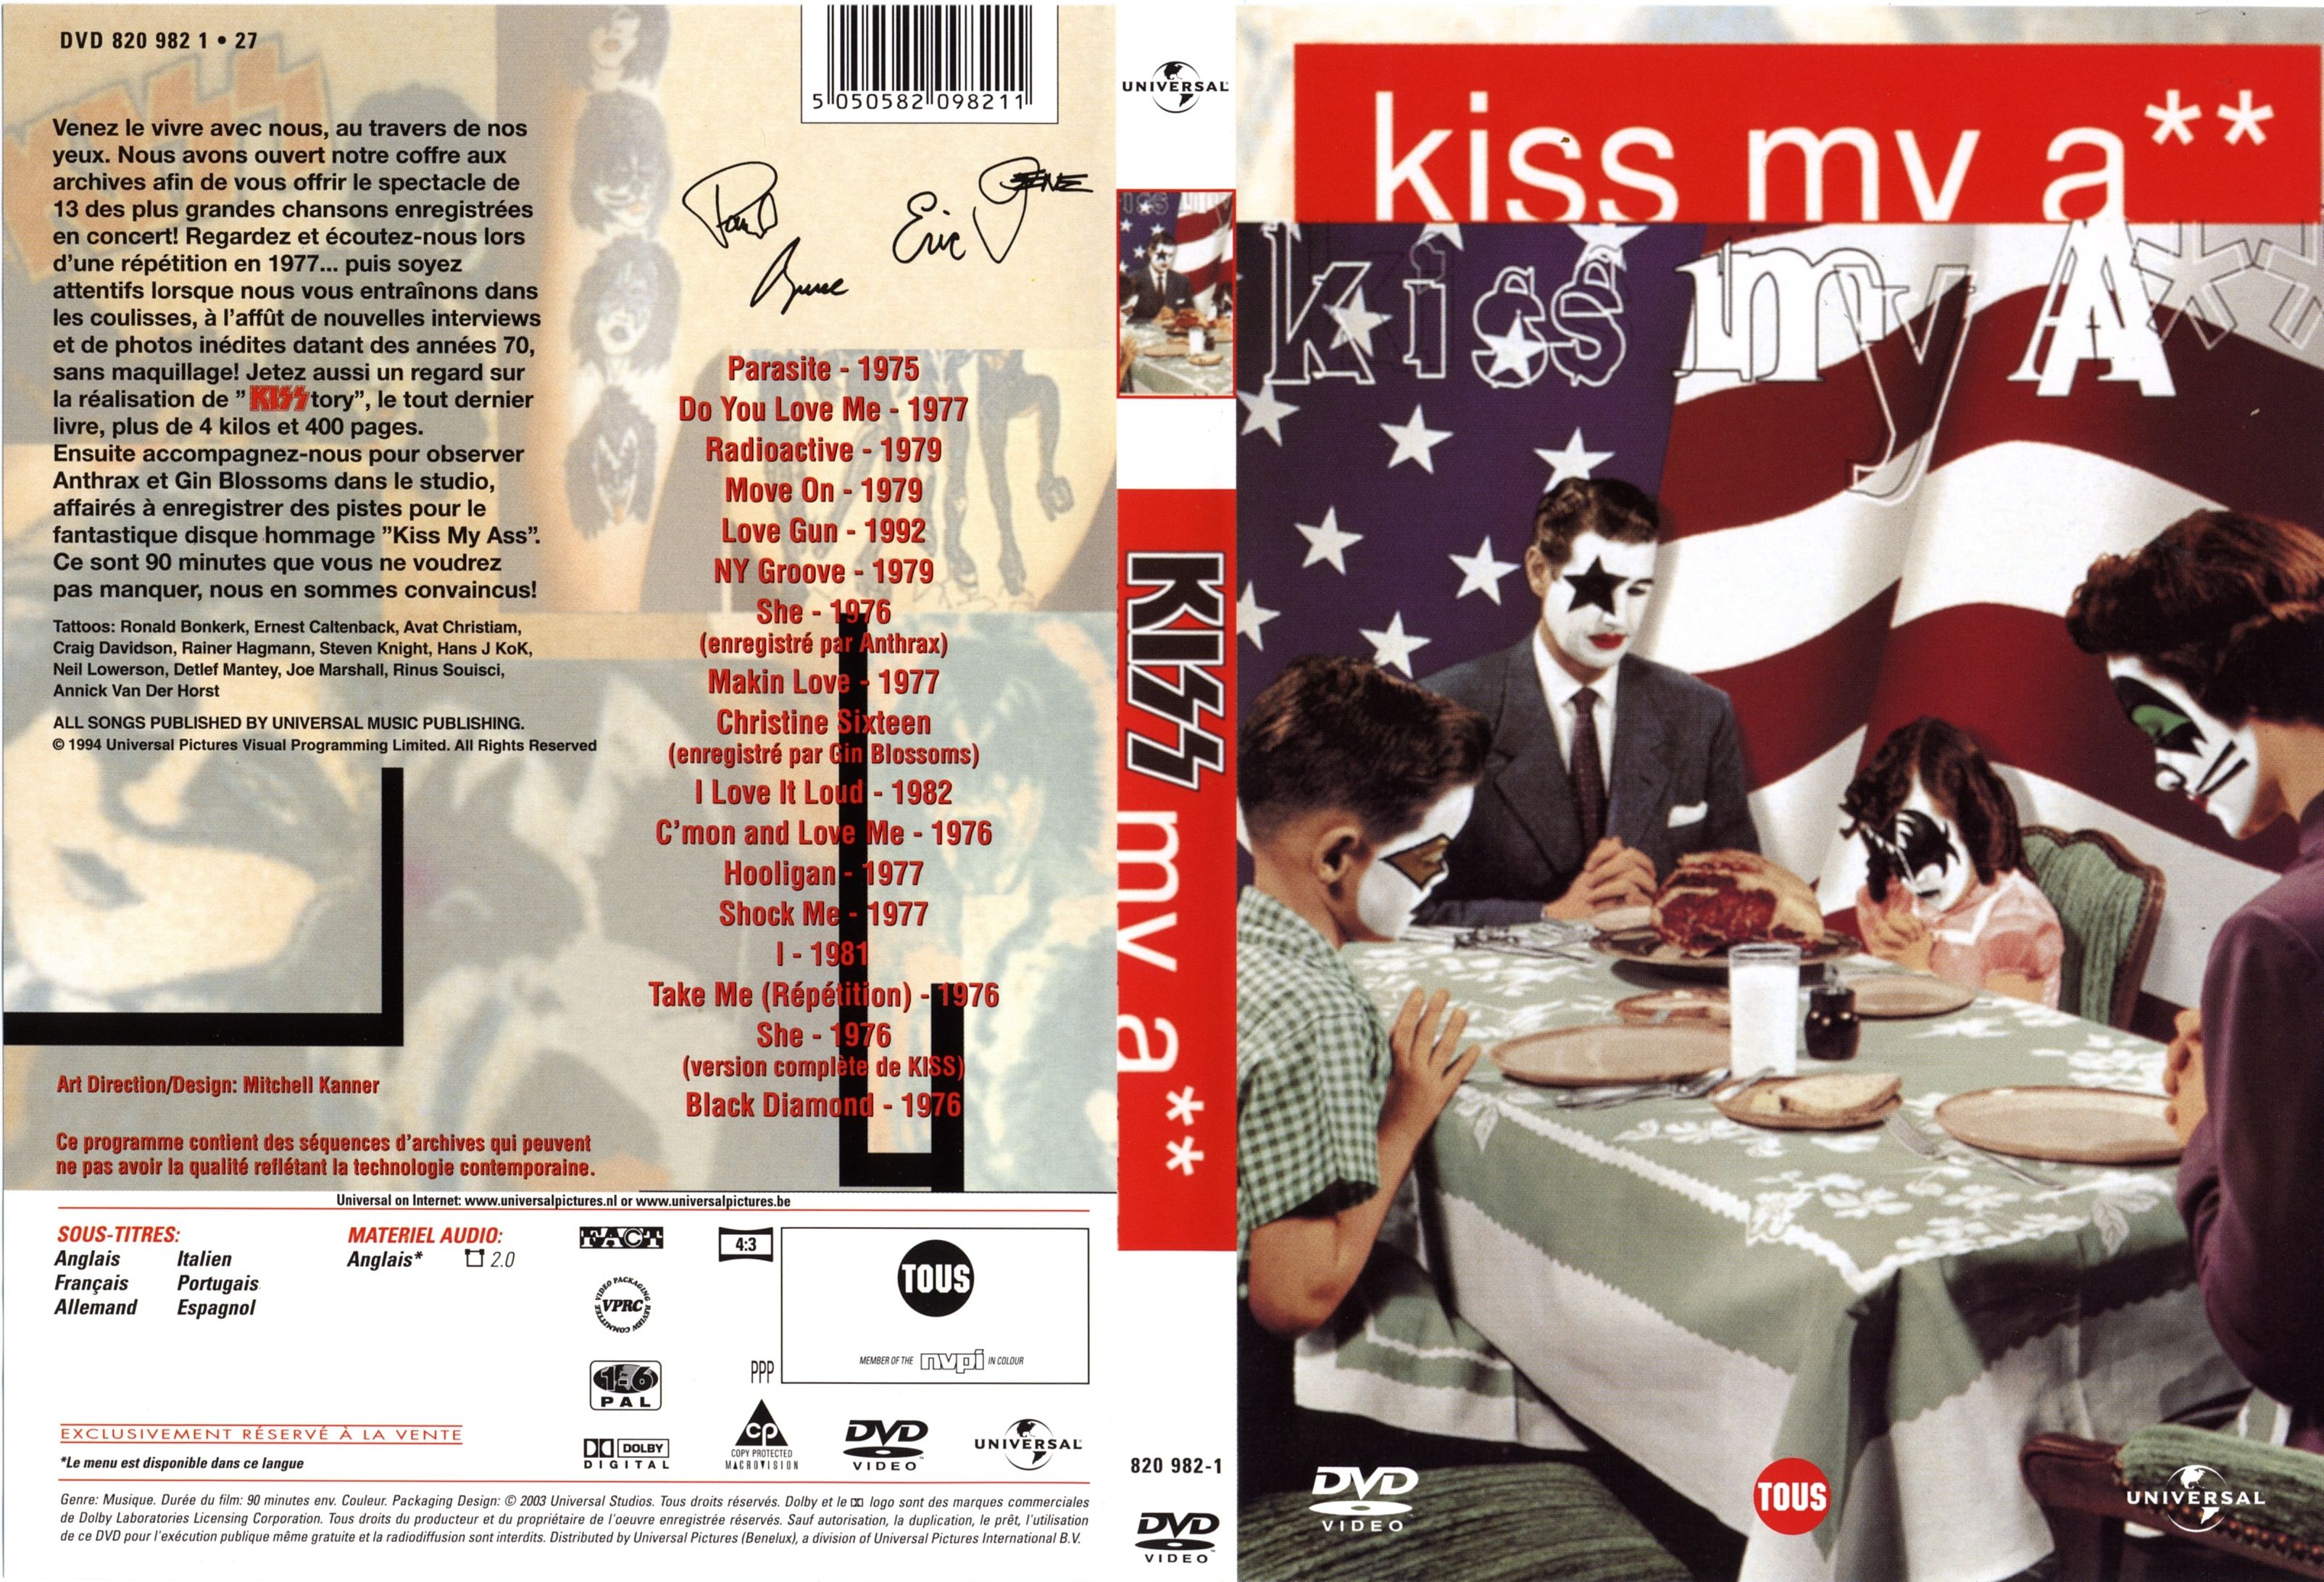 Jaquette DVD Kiss my a